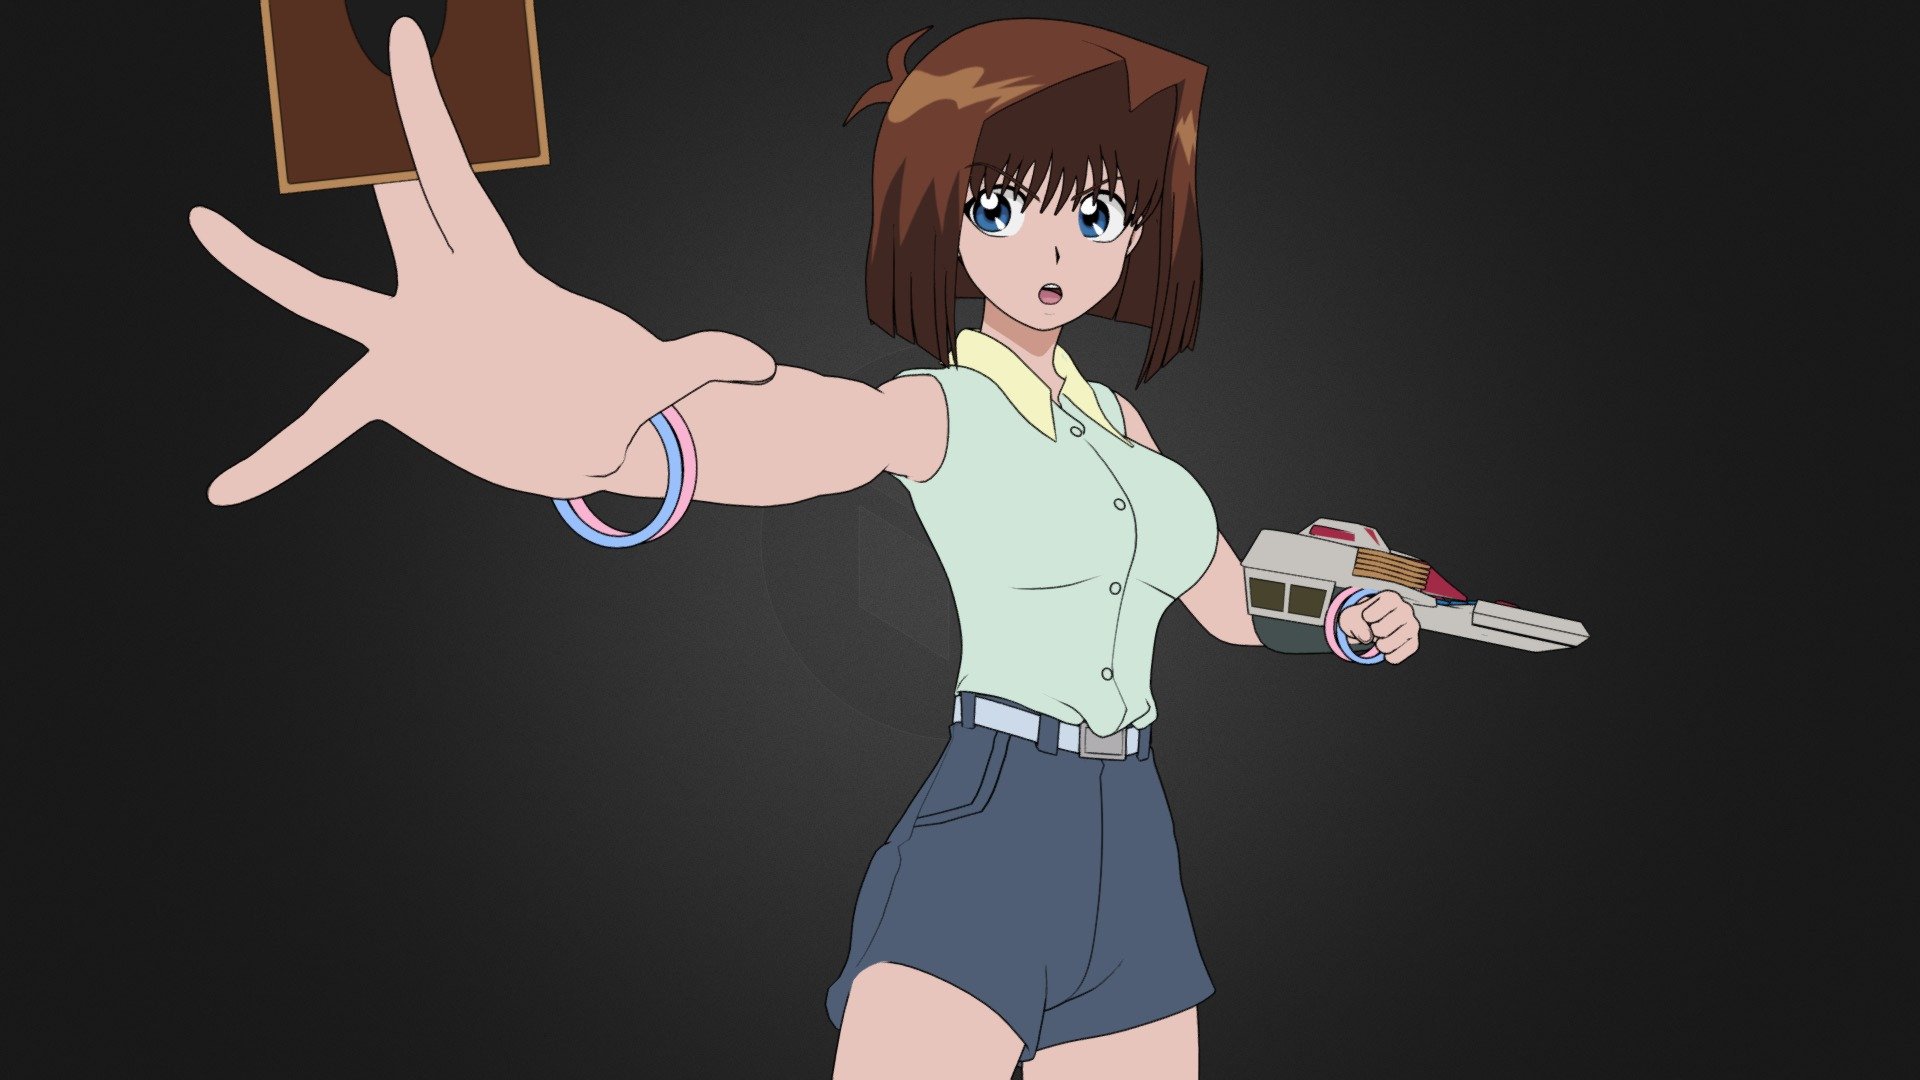 Anzu Mazaki (Tea Gardner) character from the anime Yu-Gi-Oh!.

3D Model Rigged. With Shape Keys. In blend format, for Blender v2.8 - v3.1. EEVEE renderer, with nodes, material Toon Shader.

▬▬▬▬▬▬▬▬▬▬▬▬▬▬▬▬▬▬▬▬▬▬▬▬▬▬▬▬▬▬▬▬▬▬▬▬▬▬▬▬▬▬▬▬▬▬

Buy Artstation: https://www.artstation.com/a/17645224

Buy CGTrader: encurtador.com.br/kAFS6

▬▬▬▬▬▬▬▬▬▬▬▬▬▬▬▬▬▬▬▬▬▬▬▬▬▬▬▬▬▬▬▬▬▬▬▬▬▬▬▬▬▬▬▬▬▬

Contents of the .ZIP file:

● Folder with all textures in .tga Format.

● .blend file with the complete 3D Model.

Contents of the .blend file:

● Full body, no deleted parts.

● Individual Hair, separated from the body.

● Pieces of Clothing, separated from the body. (Individuals, Can be removed)

● Complete RIG, with all bones for movement. (Metarig Rigify Armature)

● Shape Keys.

● Materials configured with nodes.

● UV mapping.

● Textures embedded in the .blend file.

● Modifiers. (Subdivide, Solidify and Outline for contours)

● Includes Duel Disk and Card 3d model